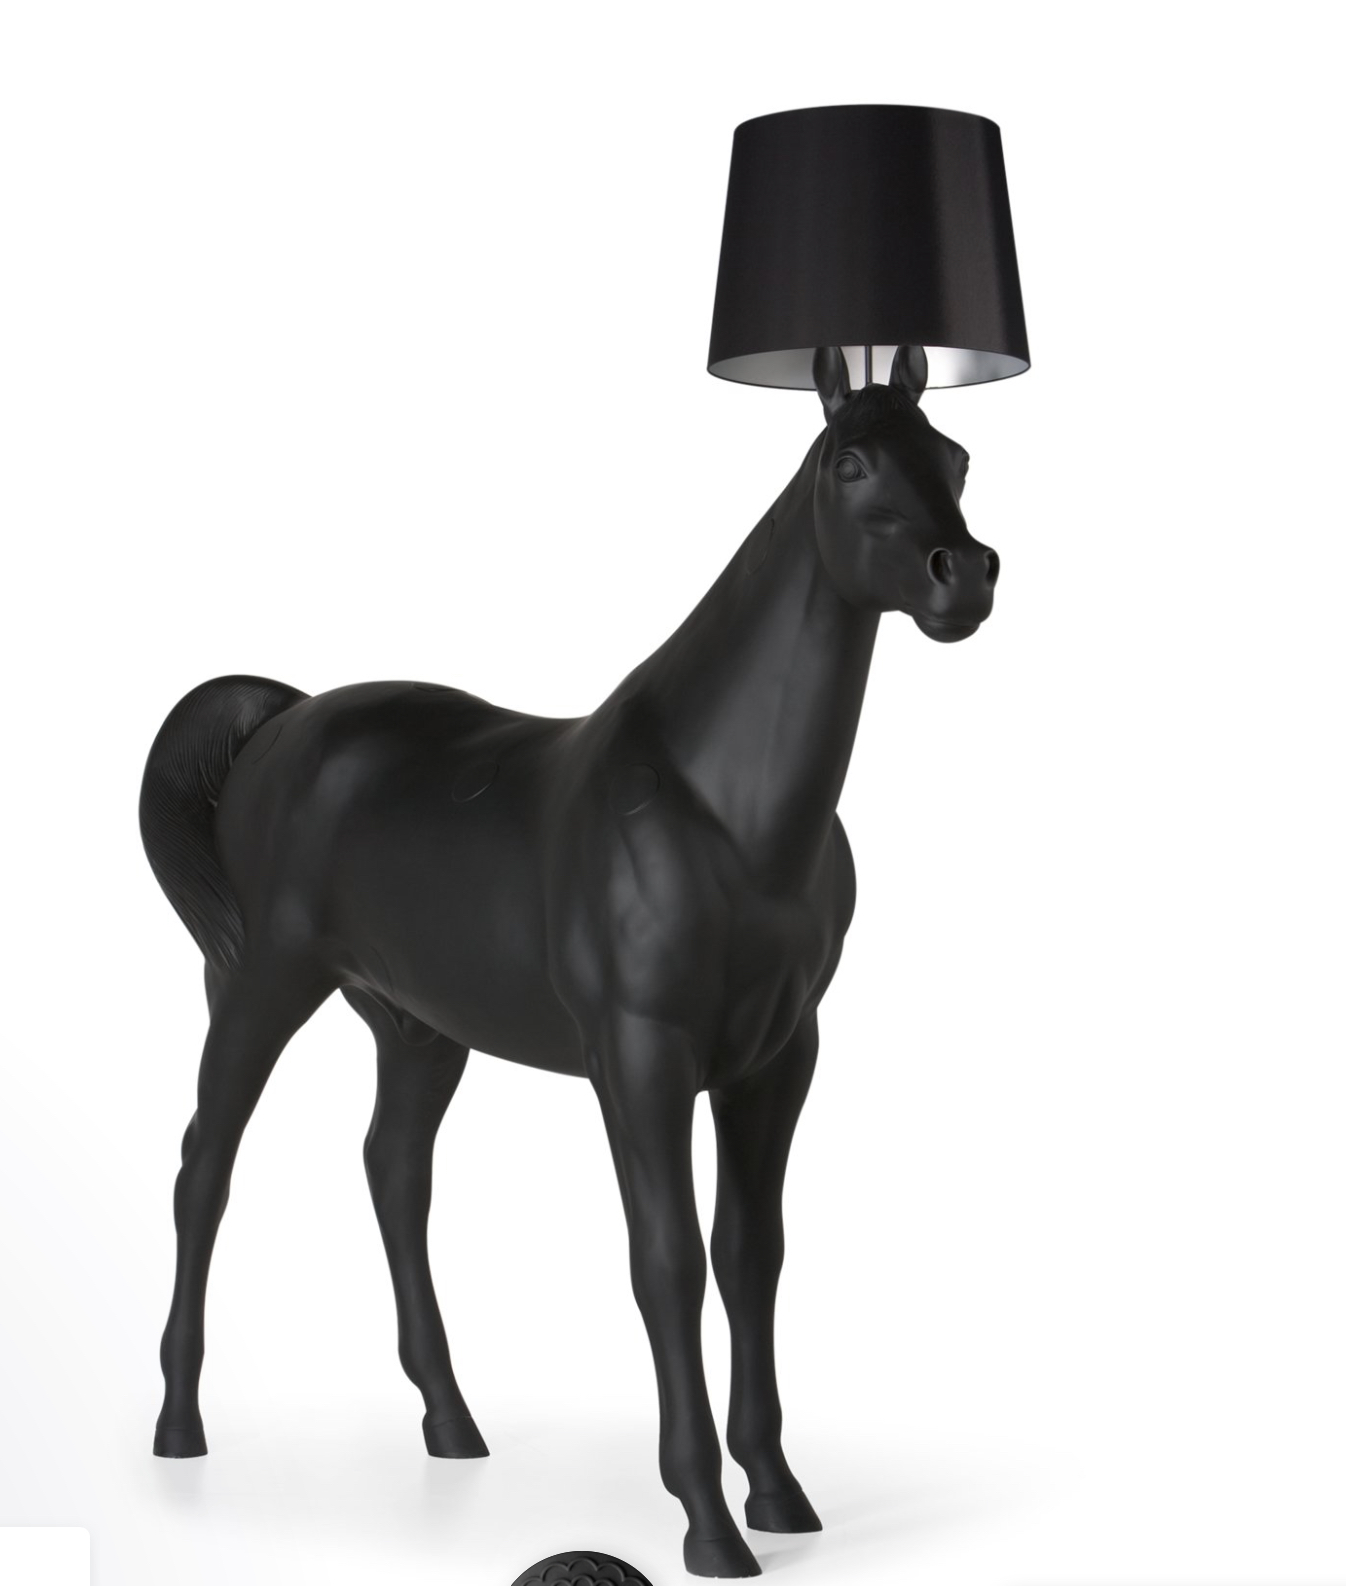 Standleuchte HORSE LAMP by moooi